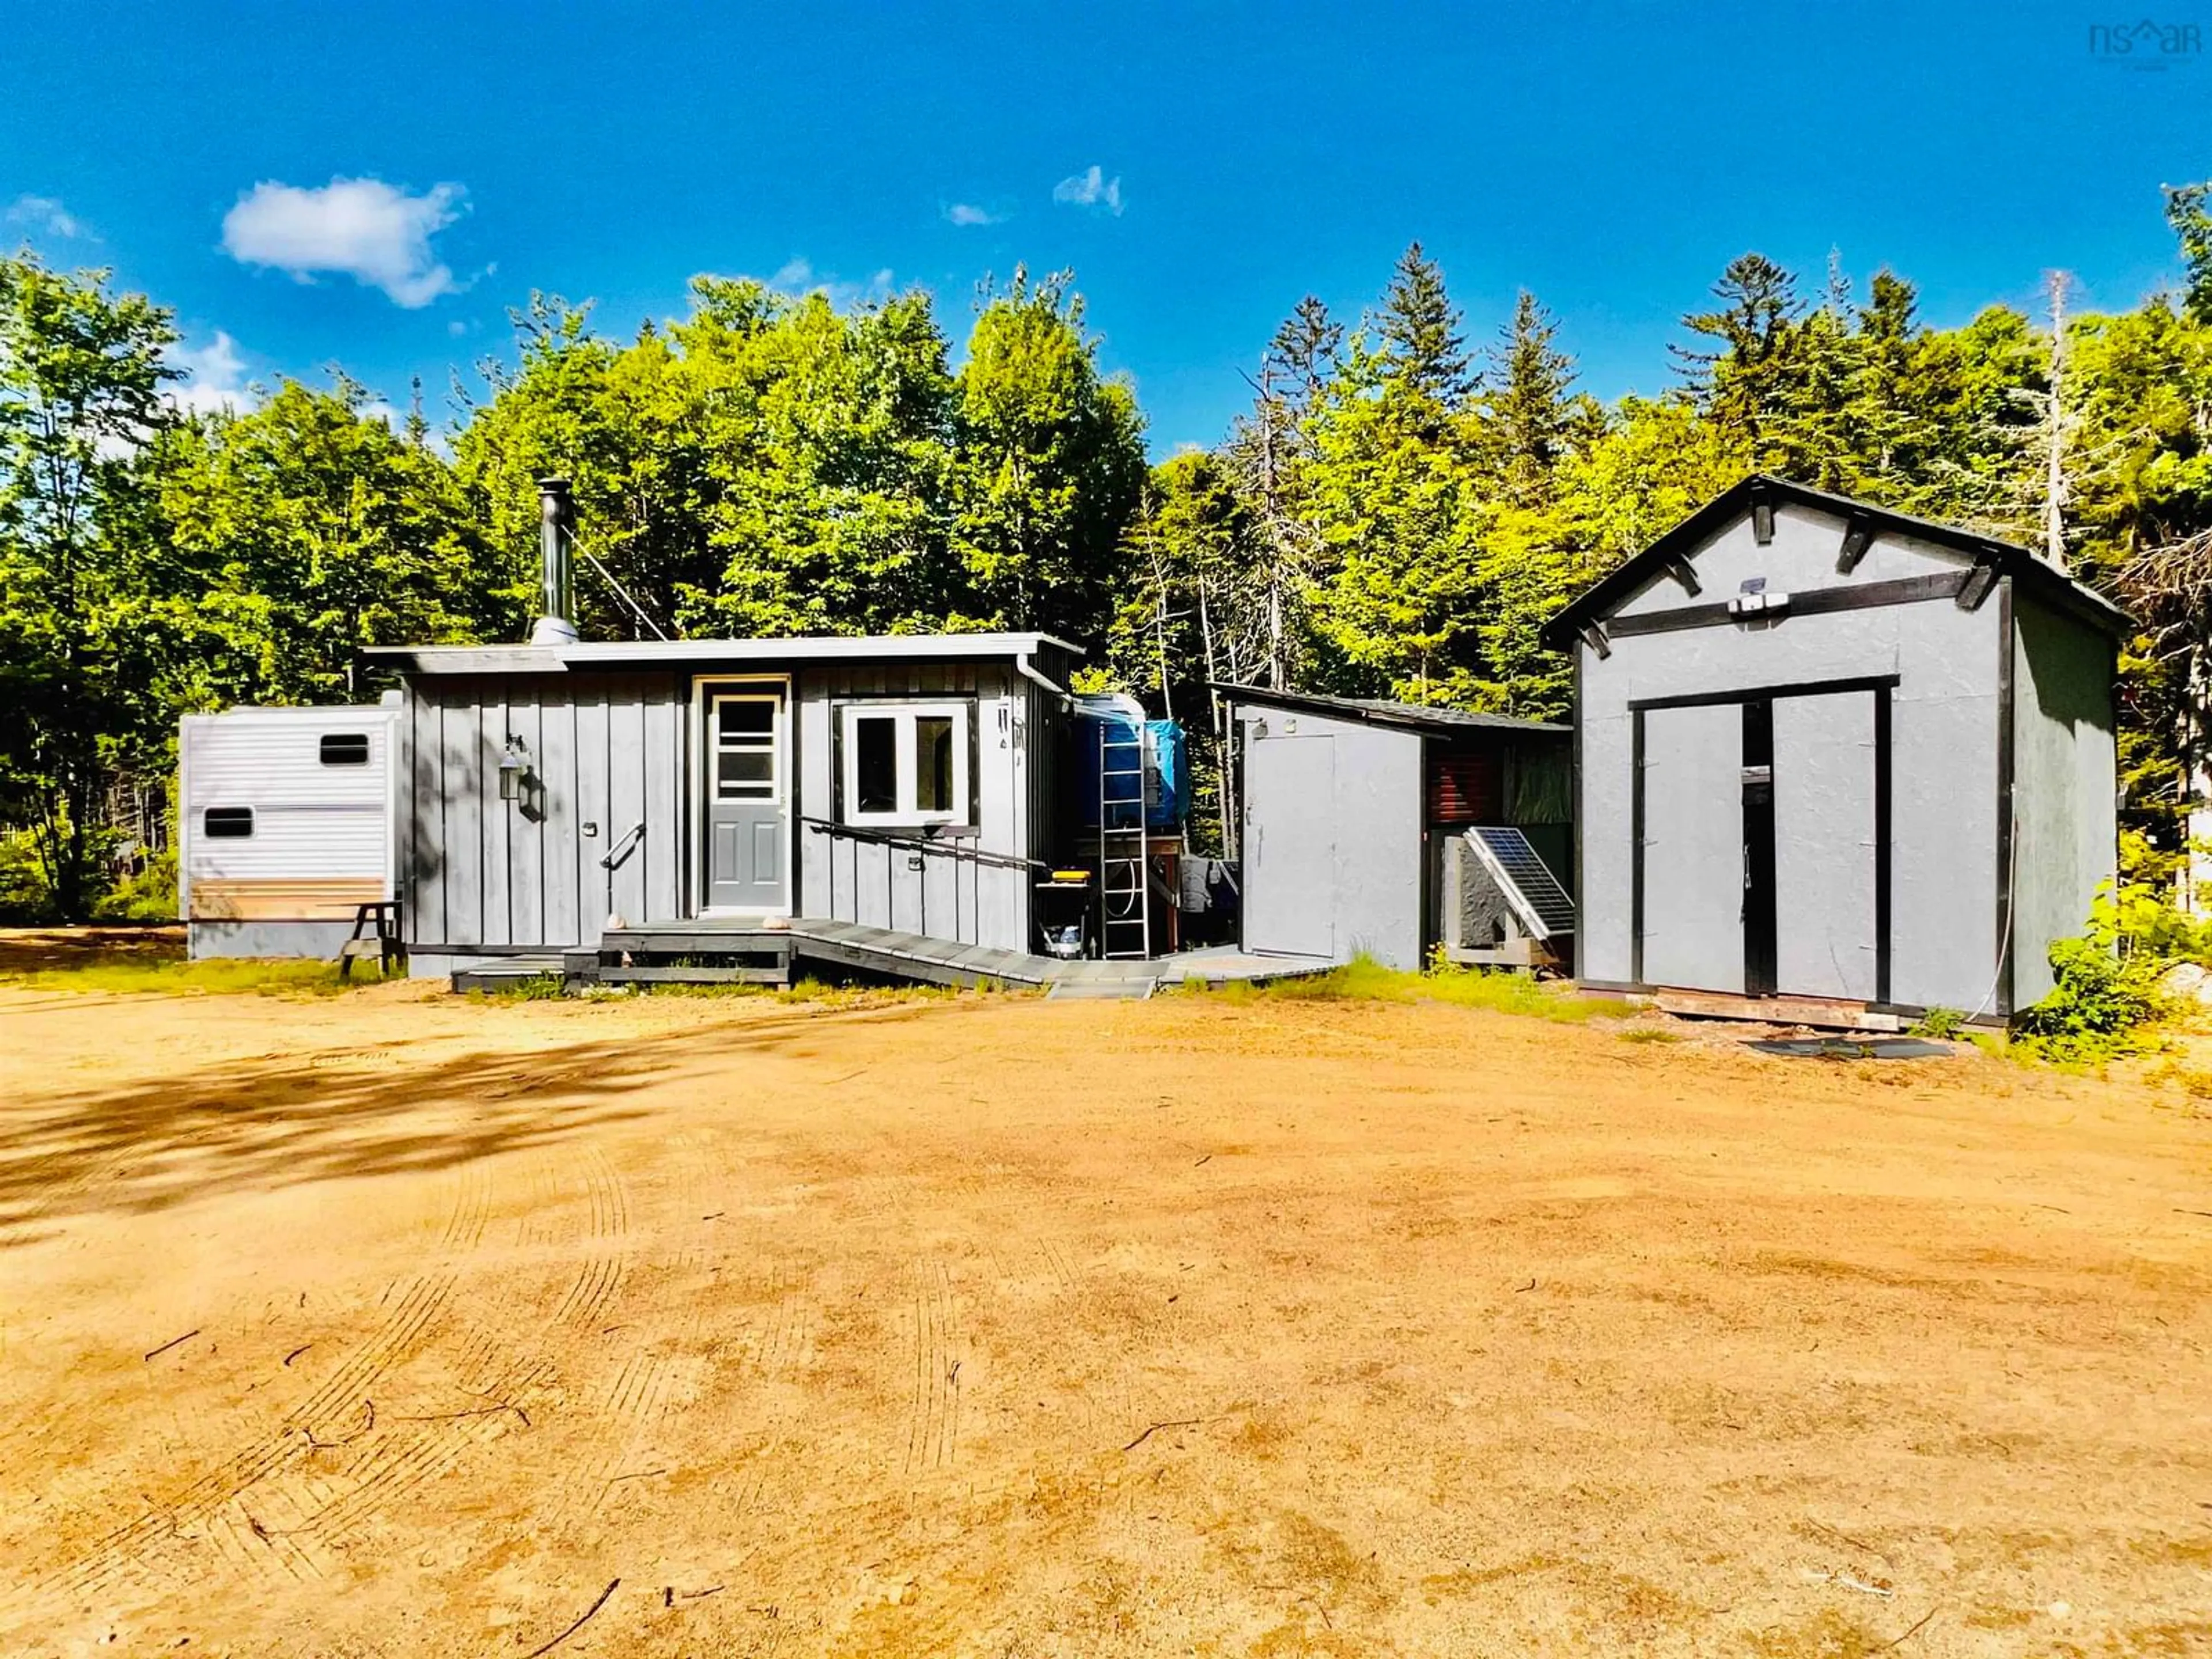 Shed for 53 Larch Lane, New Russell Nova Scotia B0J 2M0